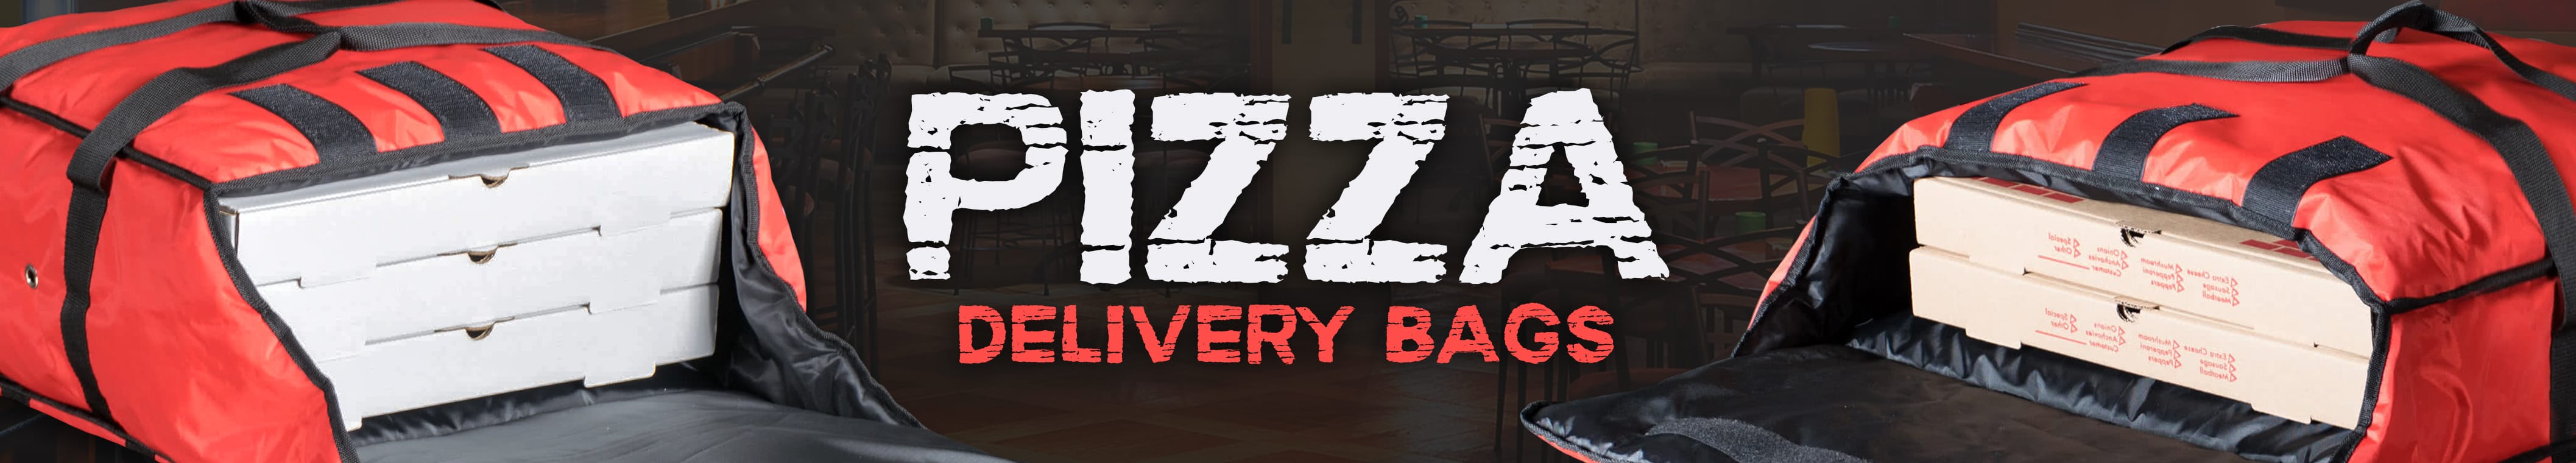 Pizza Delivery Bags